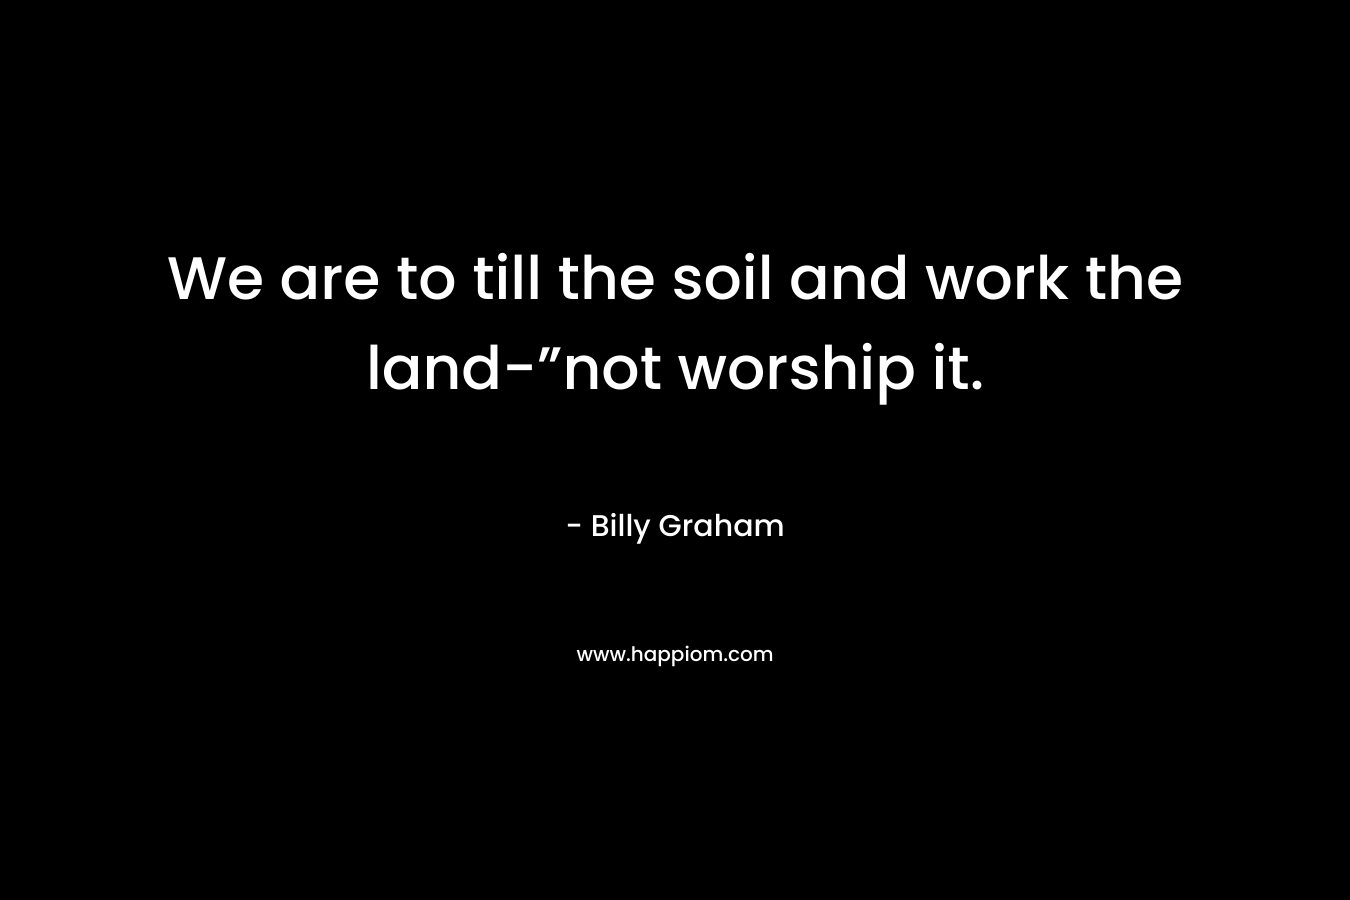 We are to till the soil and work the land-”not worship it. – Billy Graham